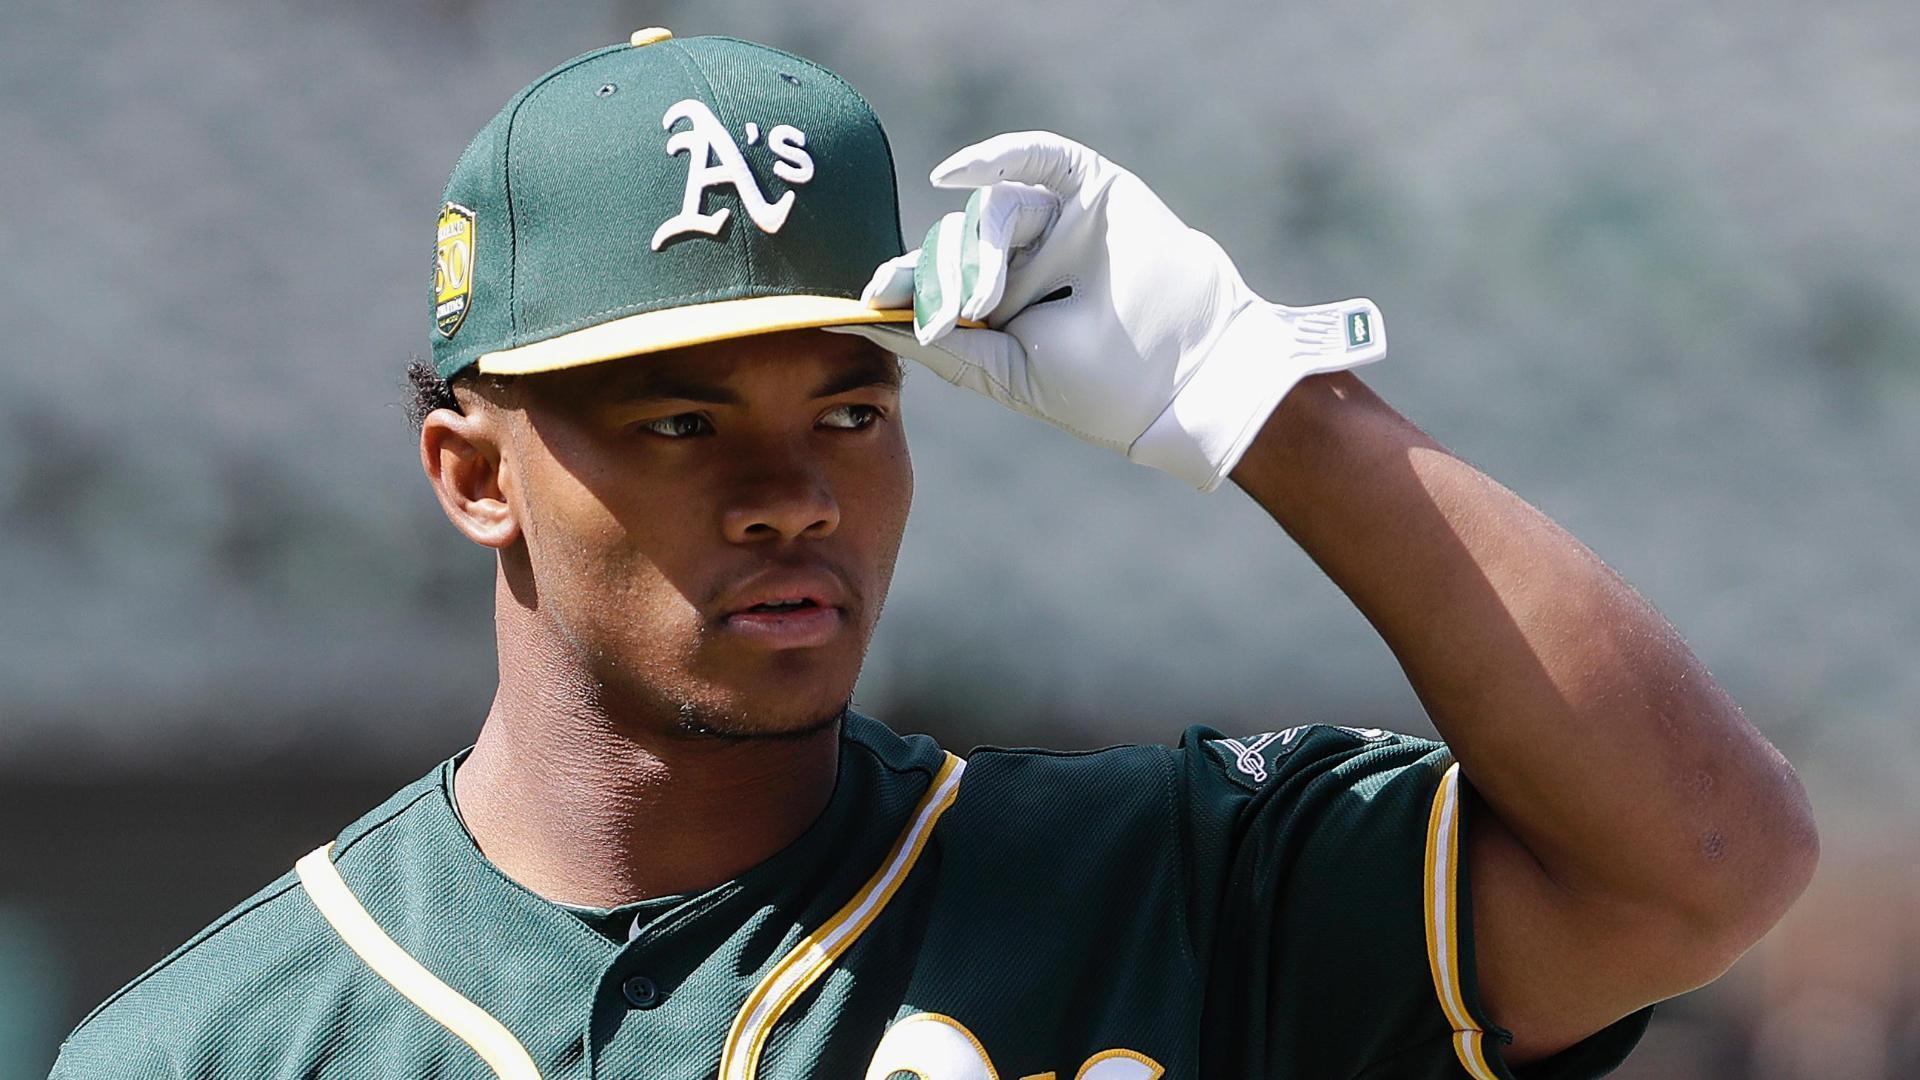 Why Kyler Murray projected better at baseball than other NFL players